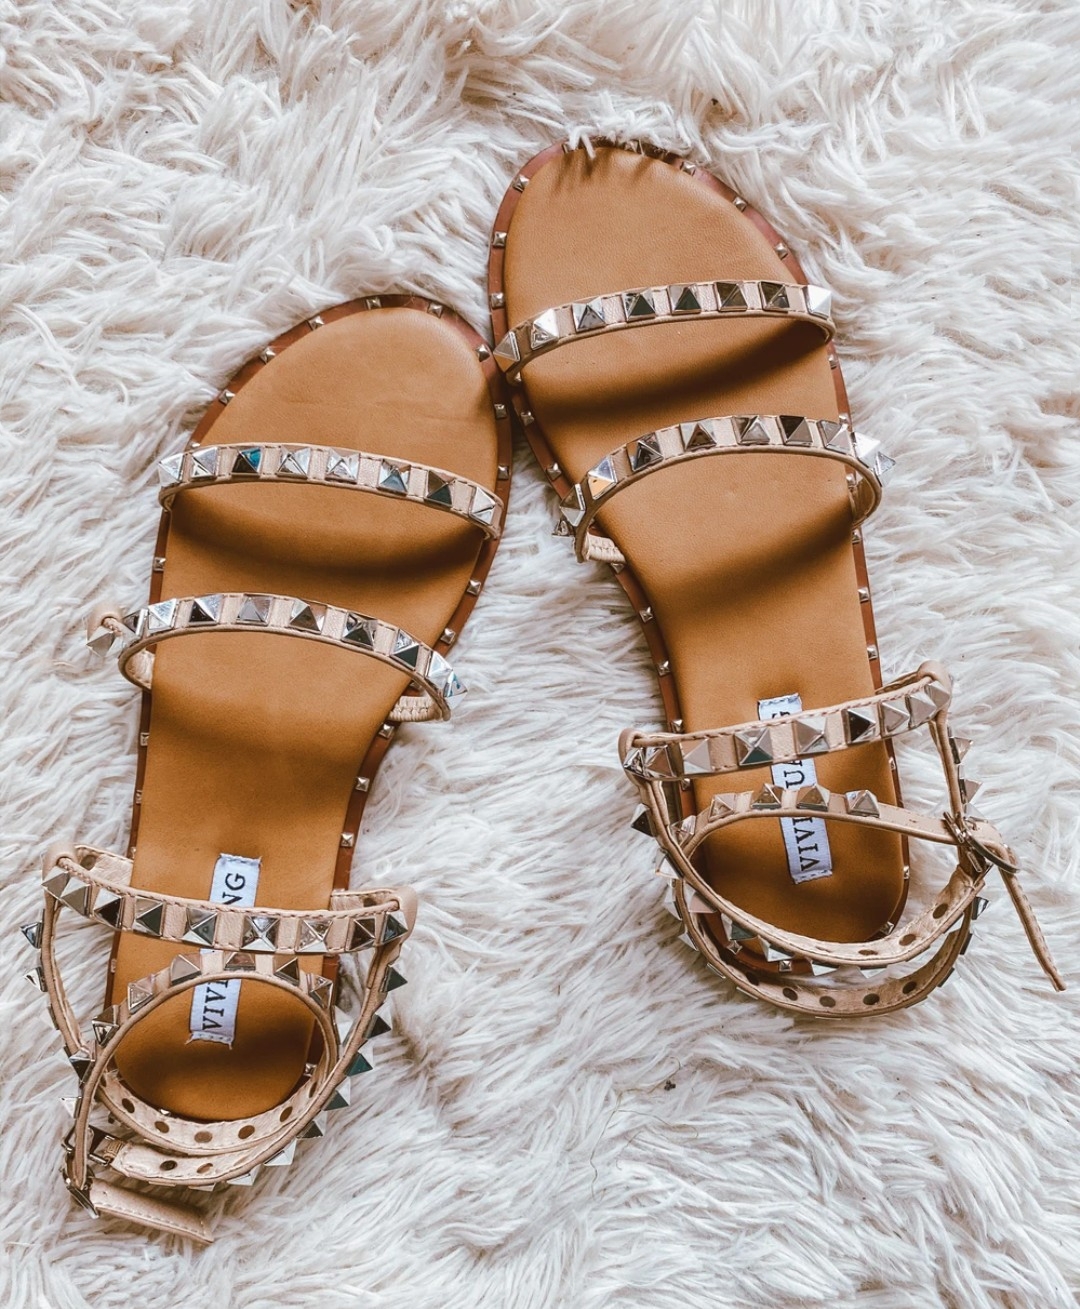 Best Studded Sandals for 2020 - We scoured the Internet for the best studded sandals in 2020! From the popular Steve Madden Travel Sandal to $10 dupe sandals, we have the perfect studded sandals for your style and budget. We're sharing the best clear studded sandals and the best nude studded sandals in this in-depth post! #sandals #summer2020 #shoes 